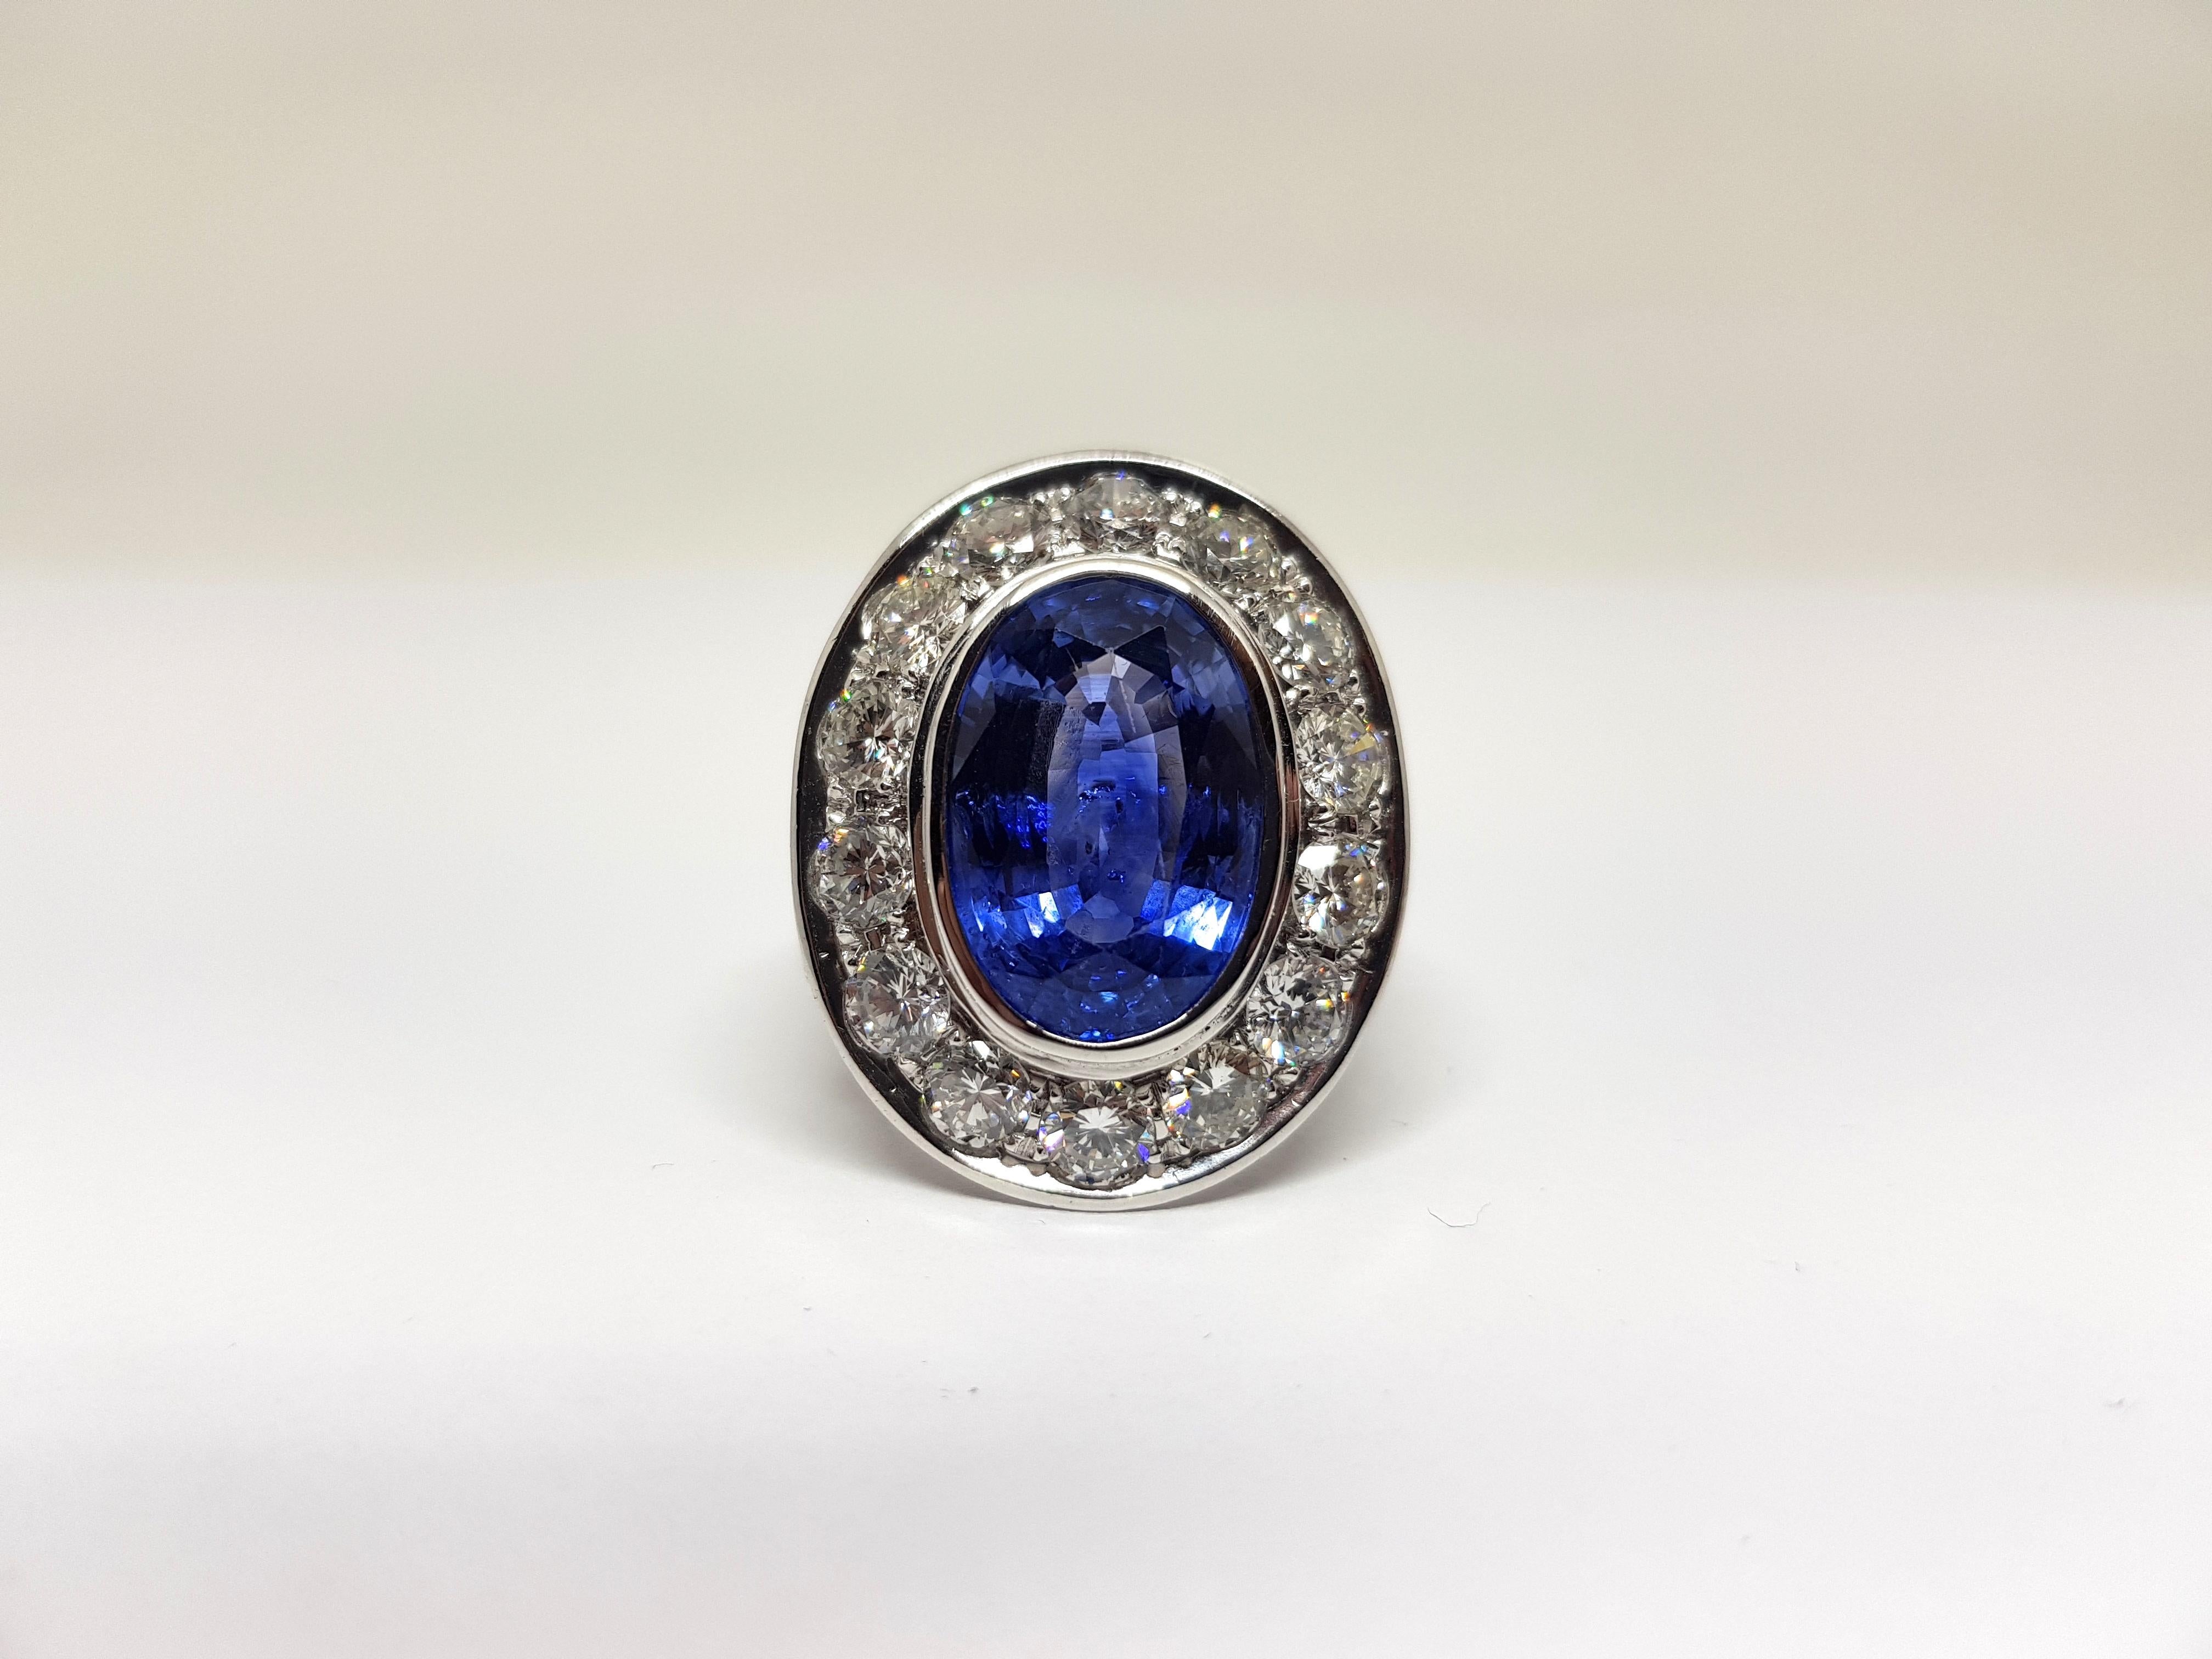 Gold: 18 carat white gold 
Weight: 27,52gr. 
Diamonds: approx. 8,00ct. colour: F-G-H clarity: VS ( 30 Diamonds of 0,25ct. to 0,30ct. each ) 
Sapphire: Oval Mixed Cut approx. 12,00ct. Blue Transparent Enhanced
Width: 0,36 Inches
Ring size: free